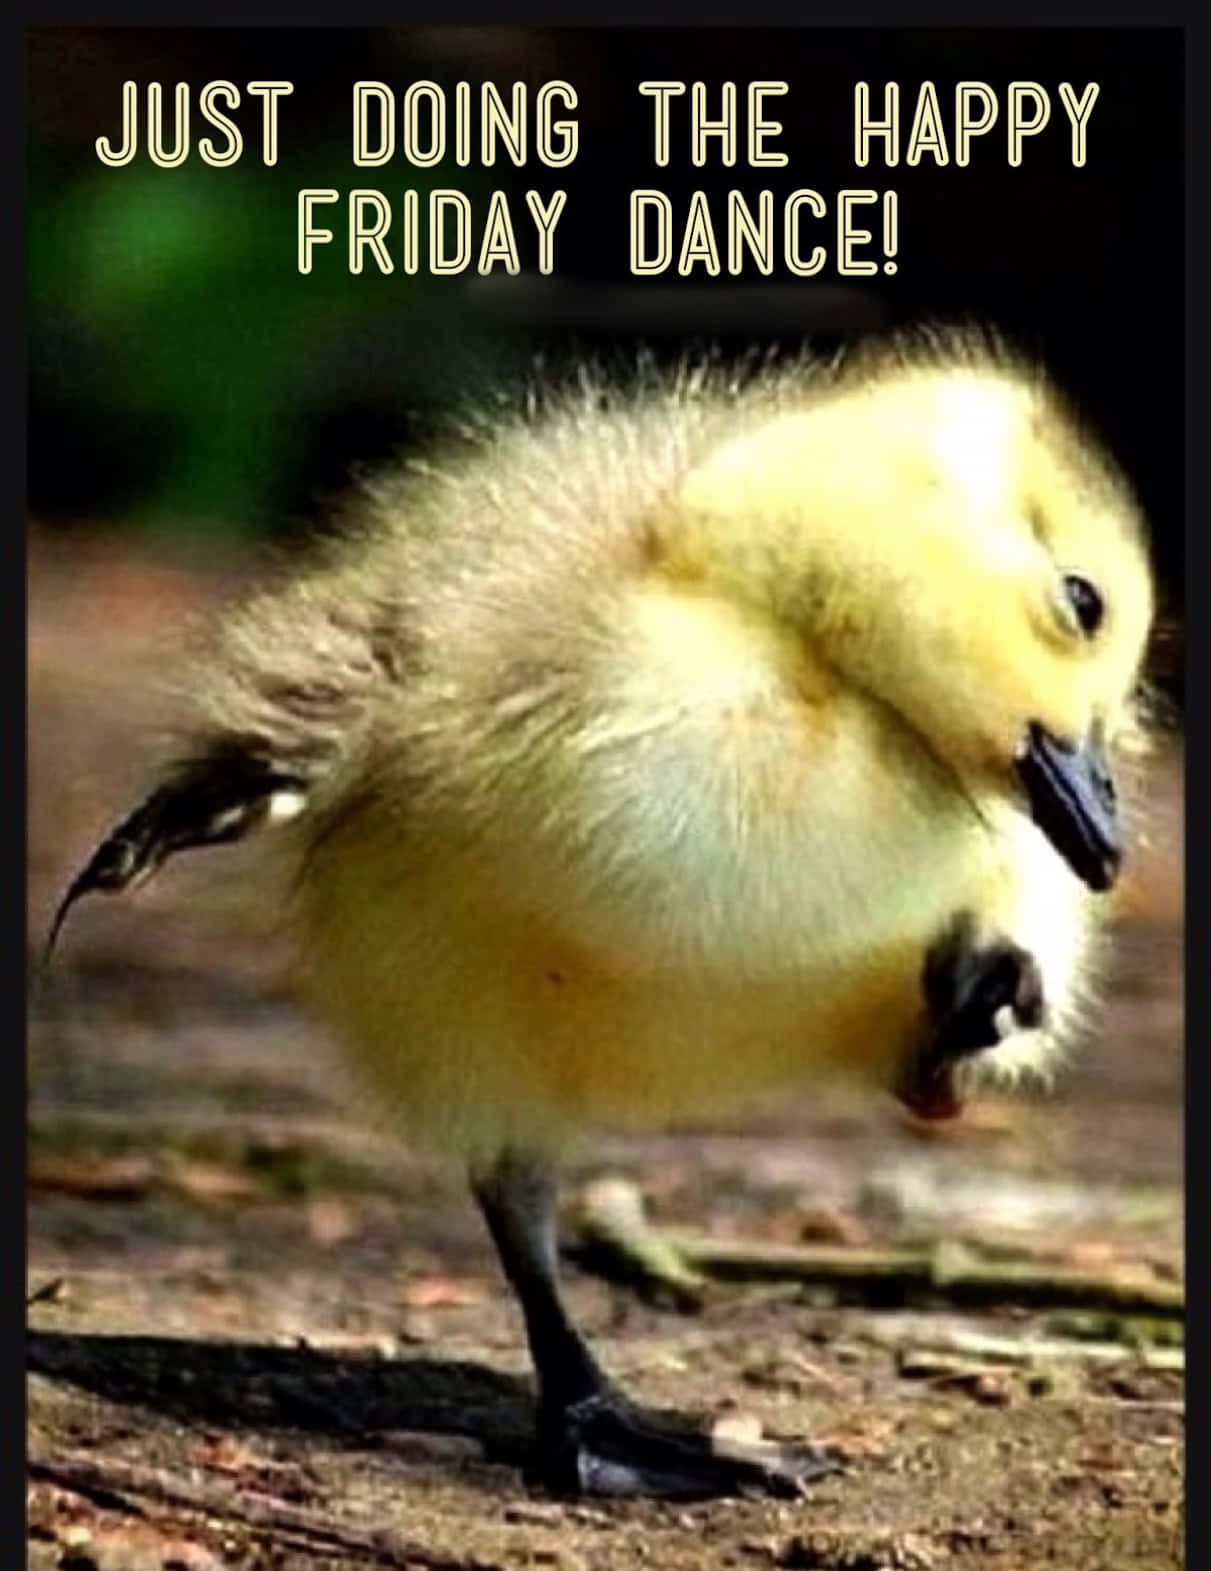 A Cute Little Duck Is Doing The Happy Friday Dance